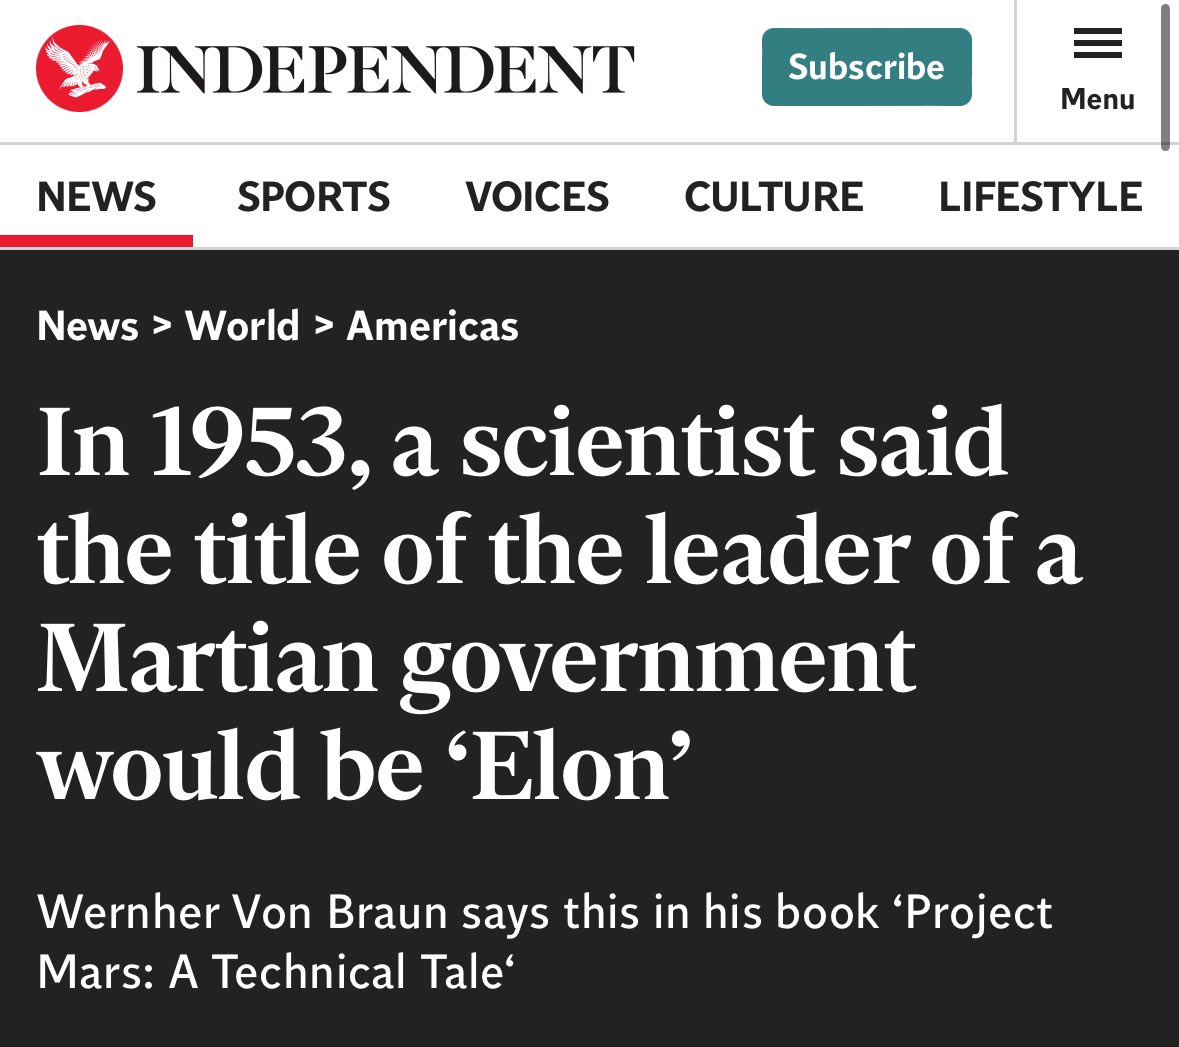 Just a reminder that a German scientist named Wernher von Braun wrote a book in 1953 called ‘Project Mars’ in which the title of the leader of the Martian government would be ‘Elon’